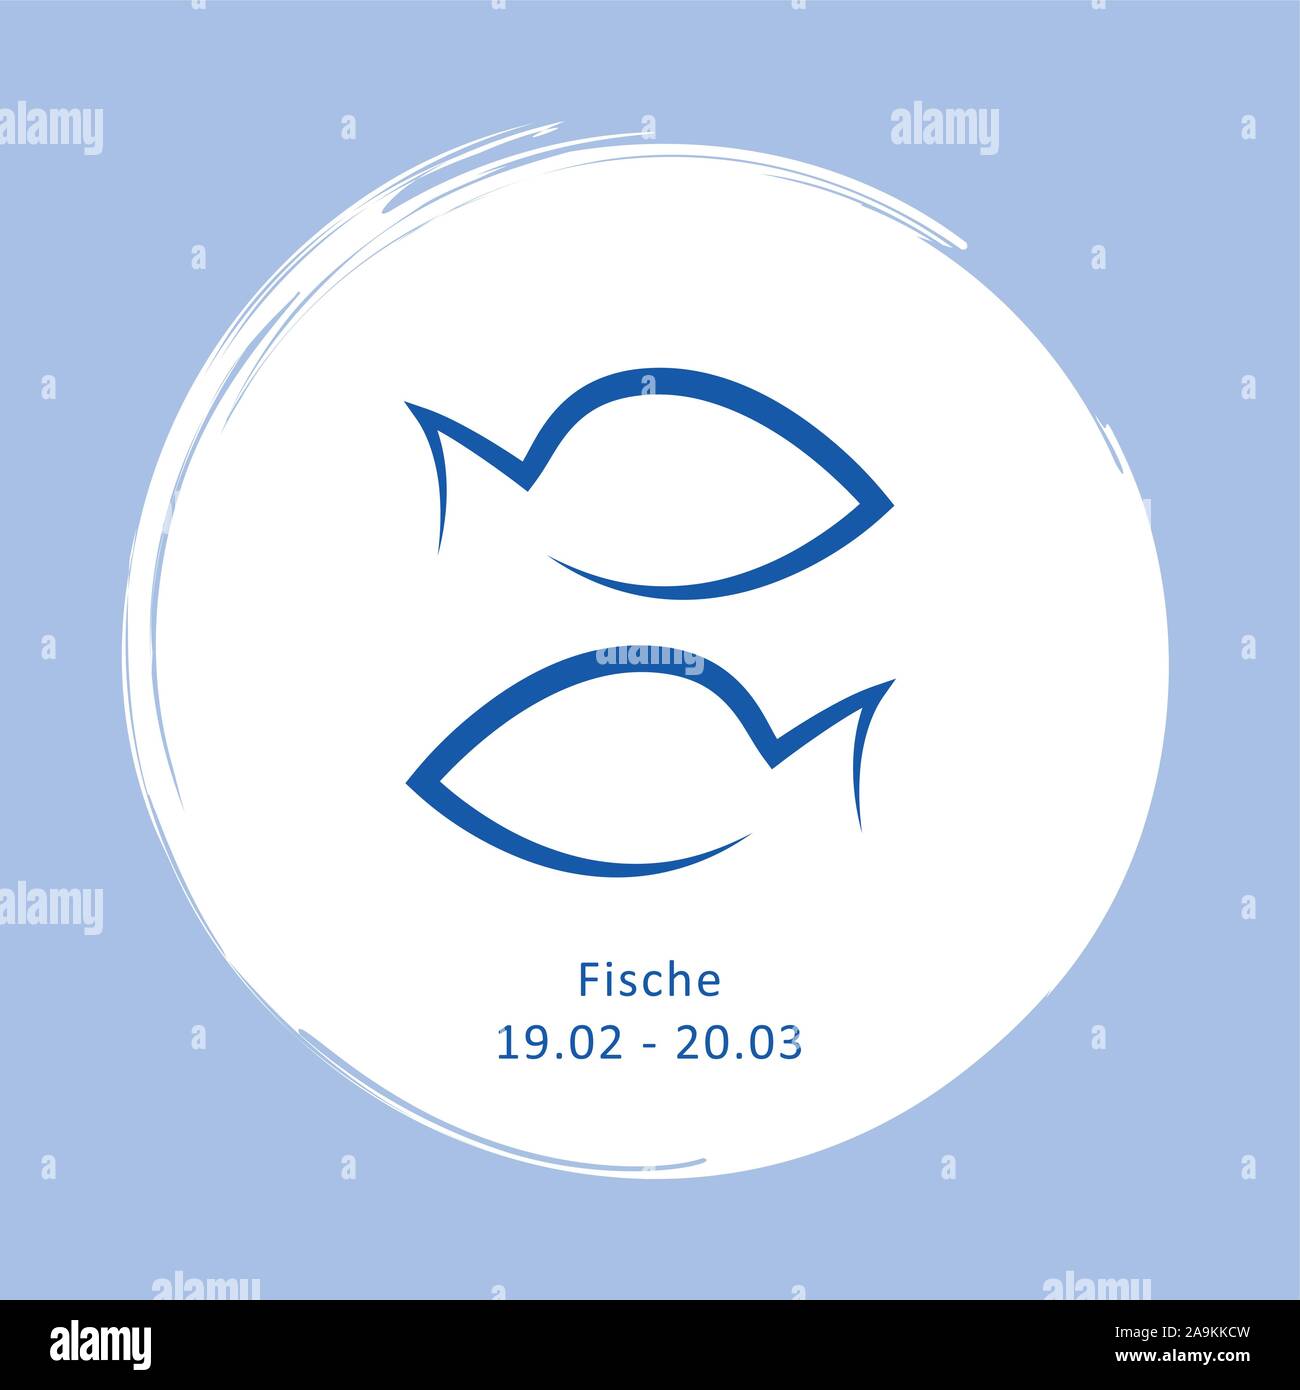 zodiac sign fish horoscope with description and date vector illustration EPS10 Stock Vector